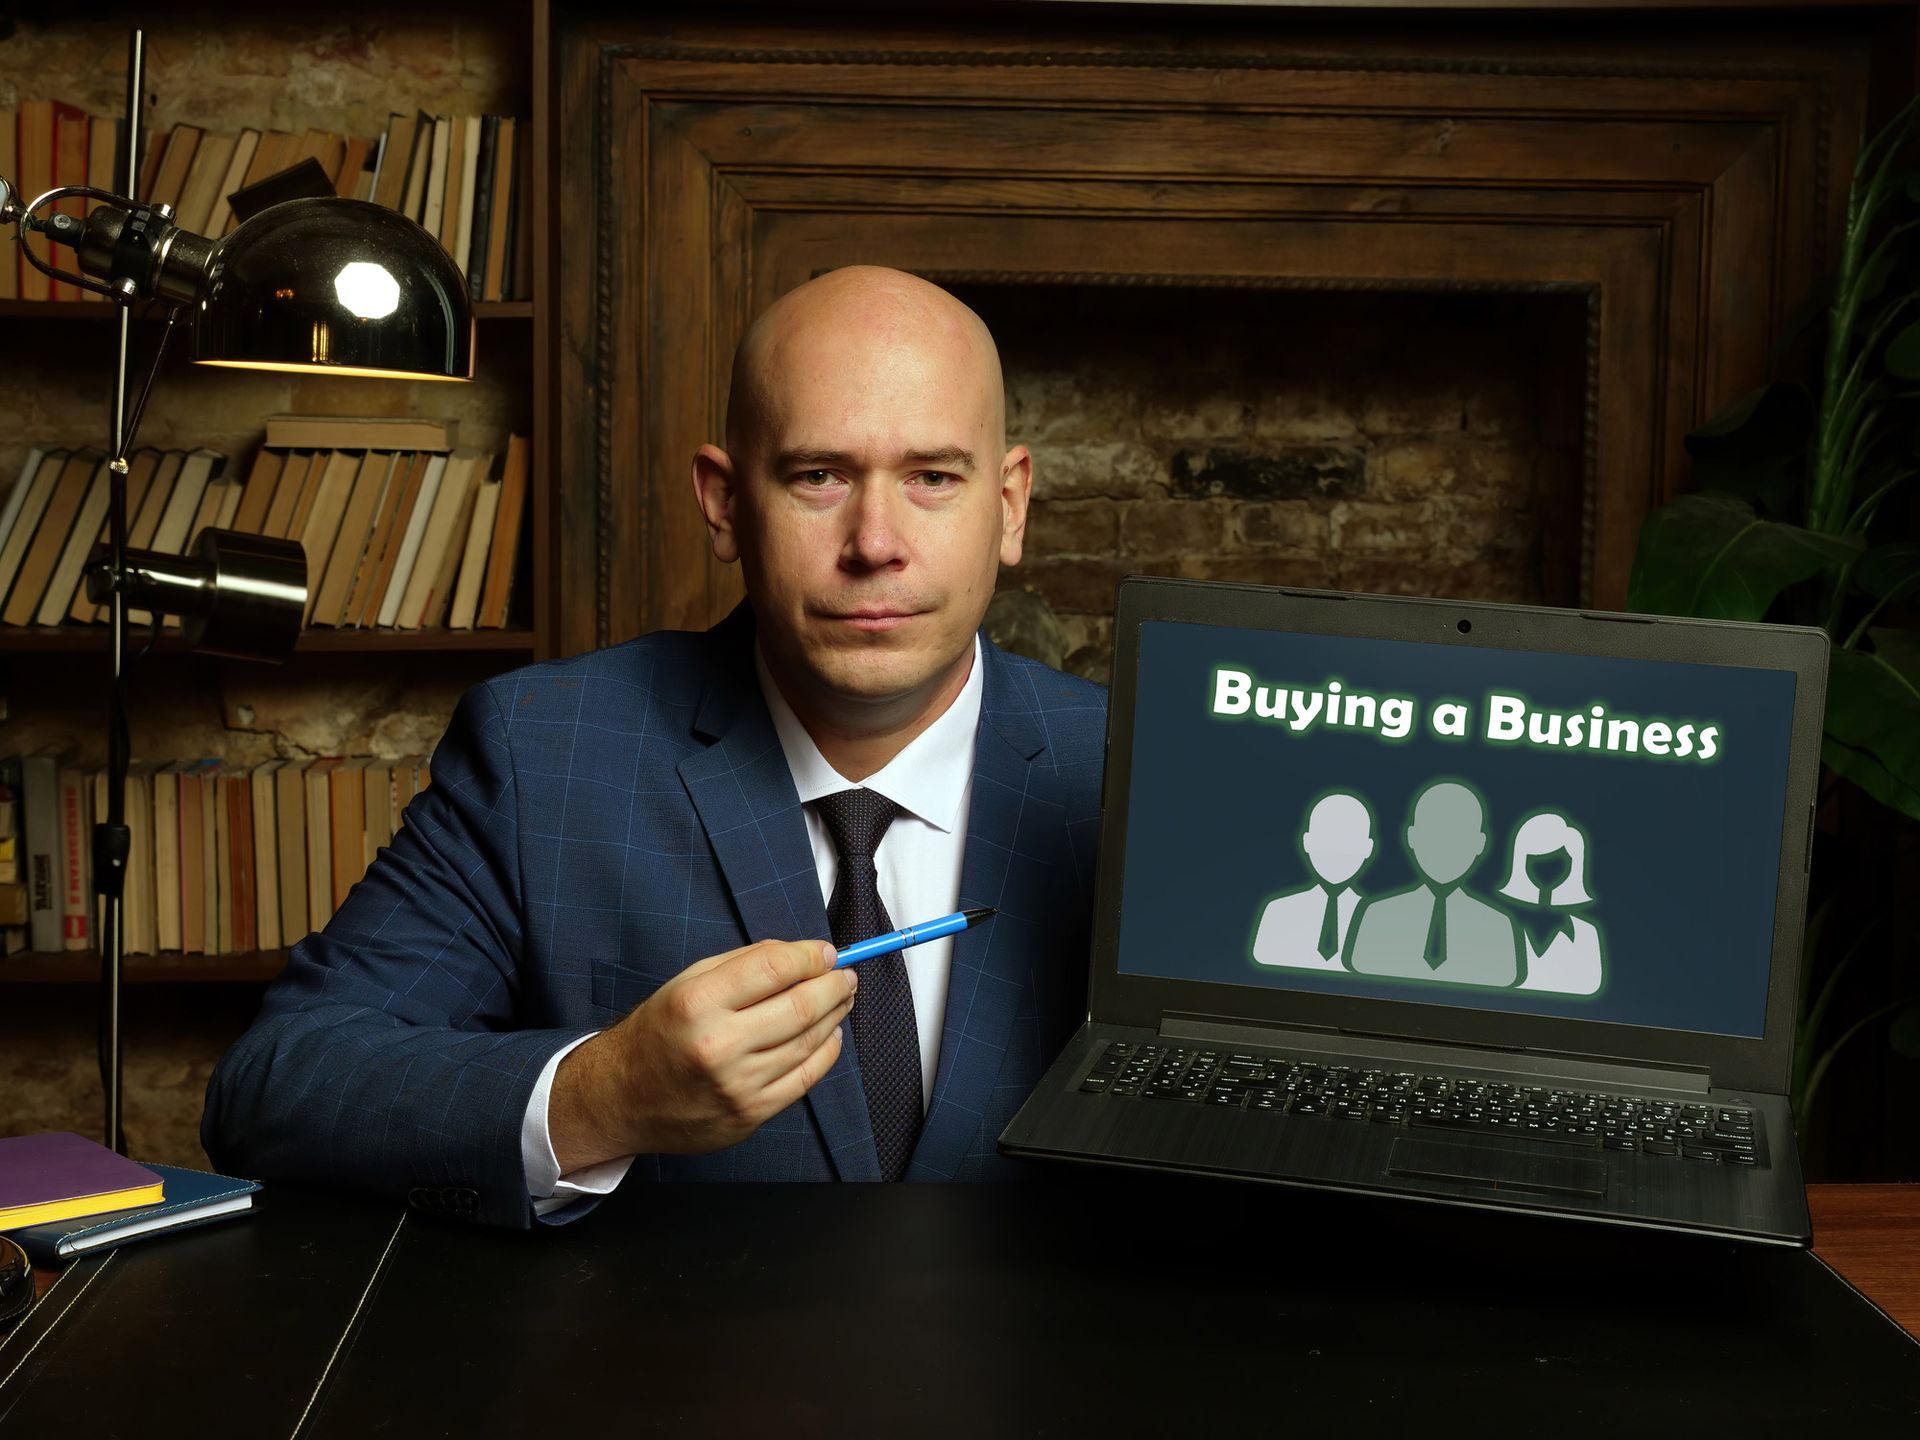 buying a business